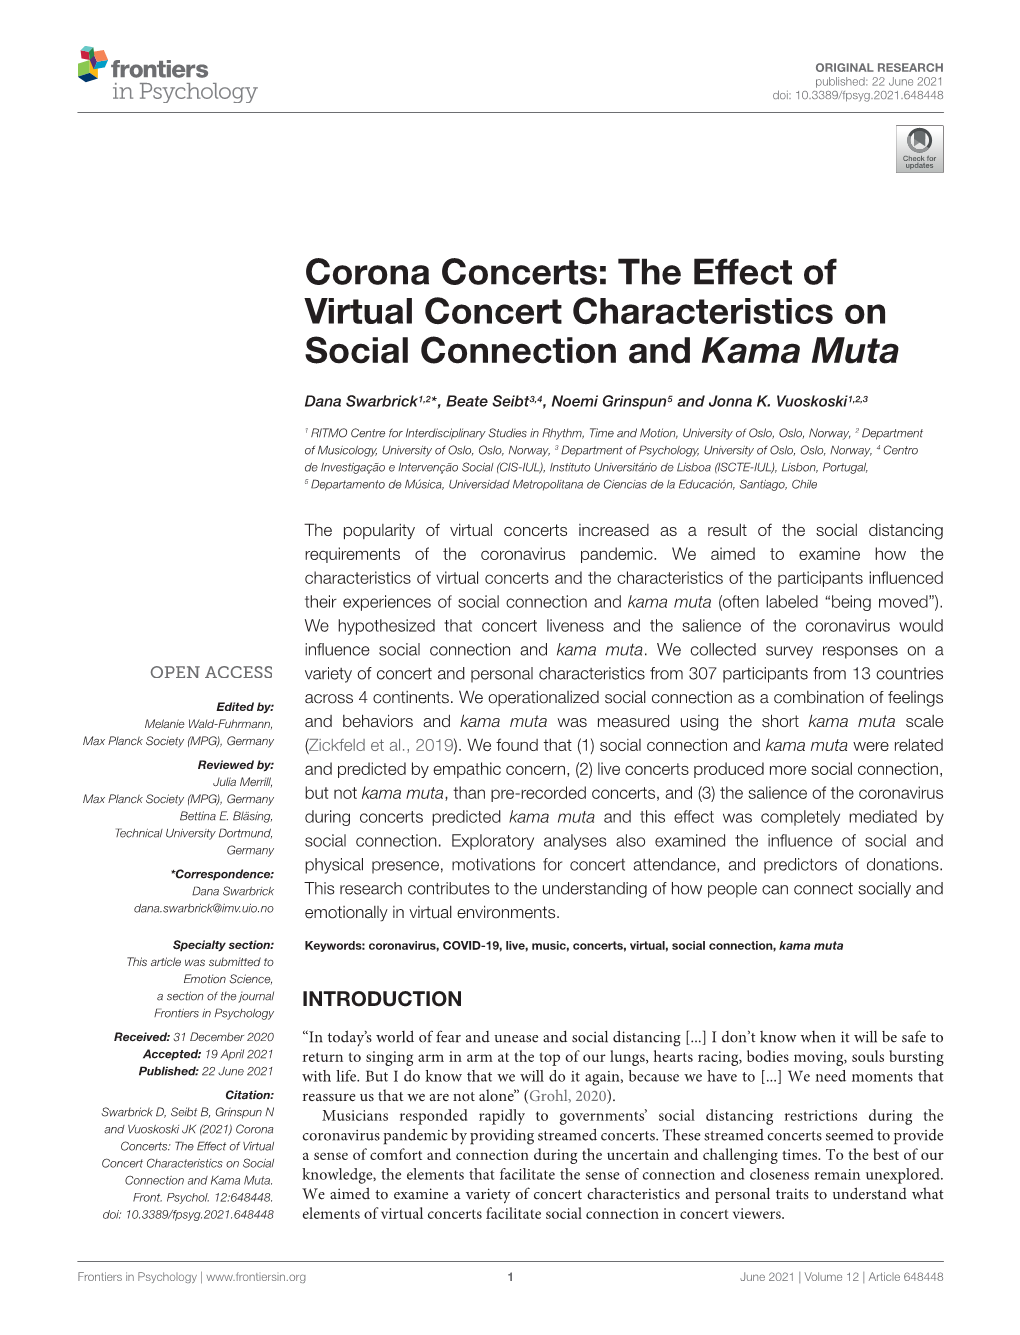 Corona Concerts: the Effect of Virtual Concert Characteristics on Social Connection and Kama Muta